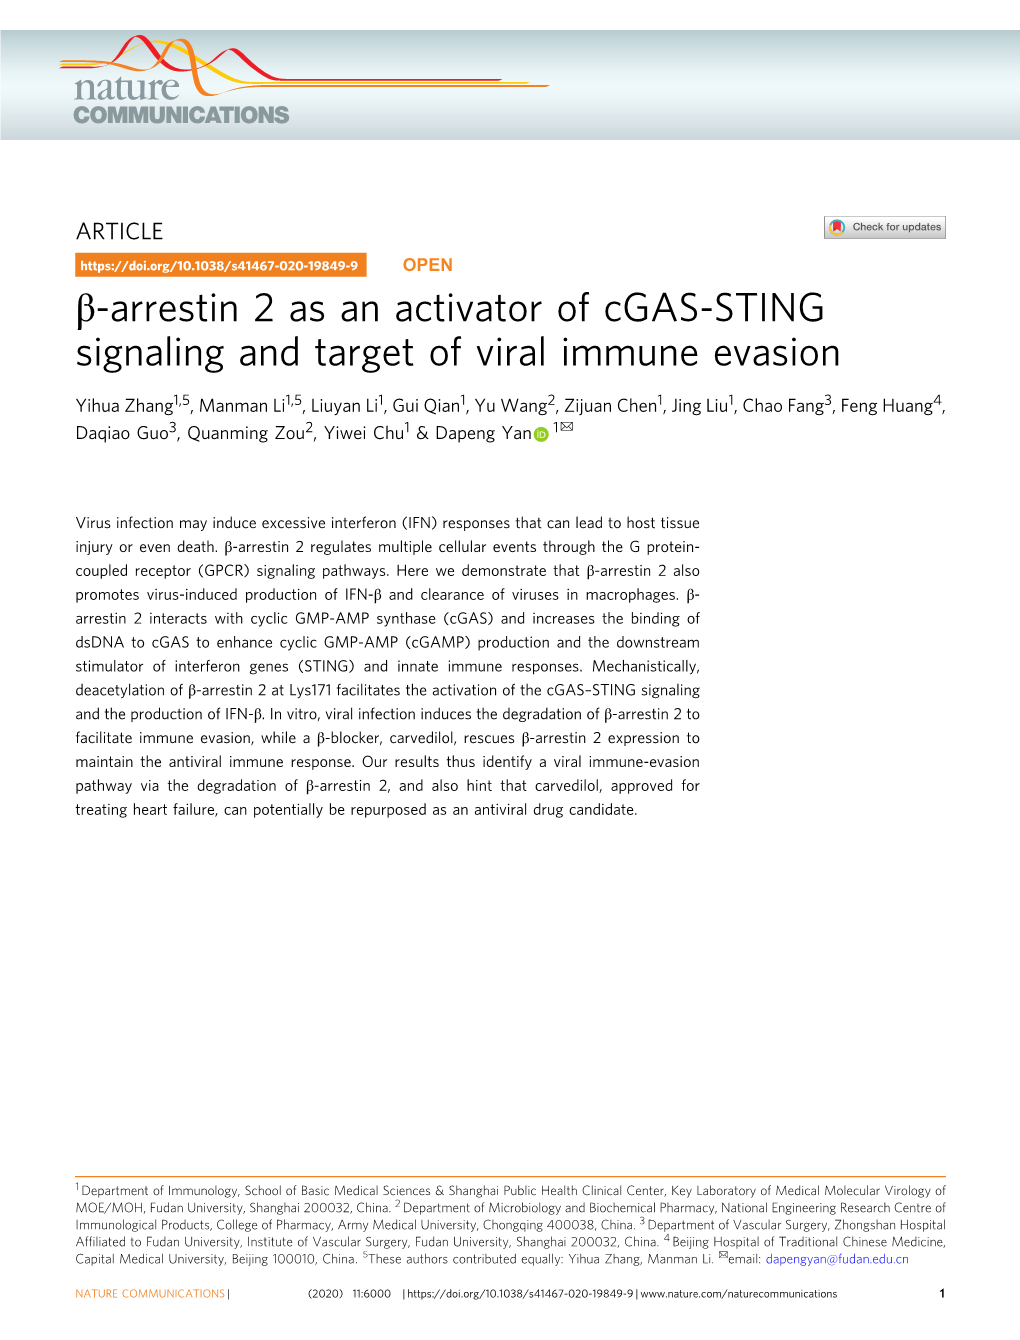 Î²-Arrestin 2 As an Activator of Cgas-STING Signaling and Target Of